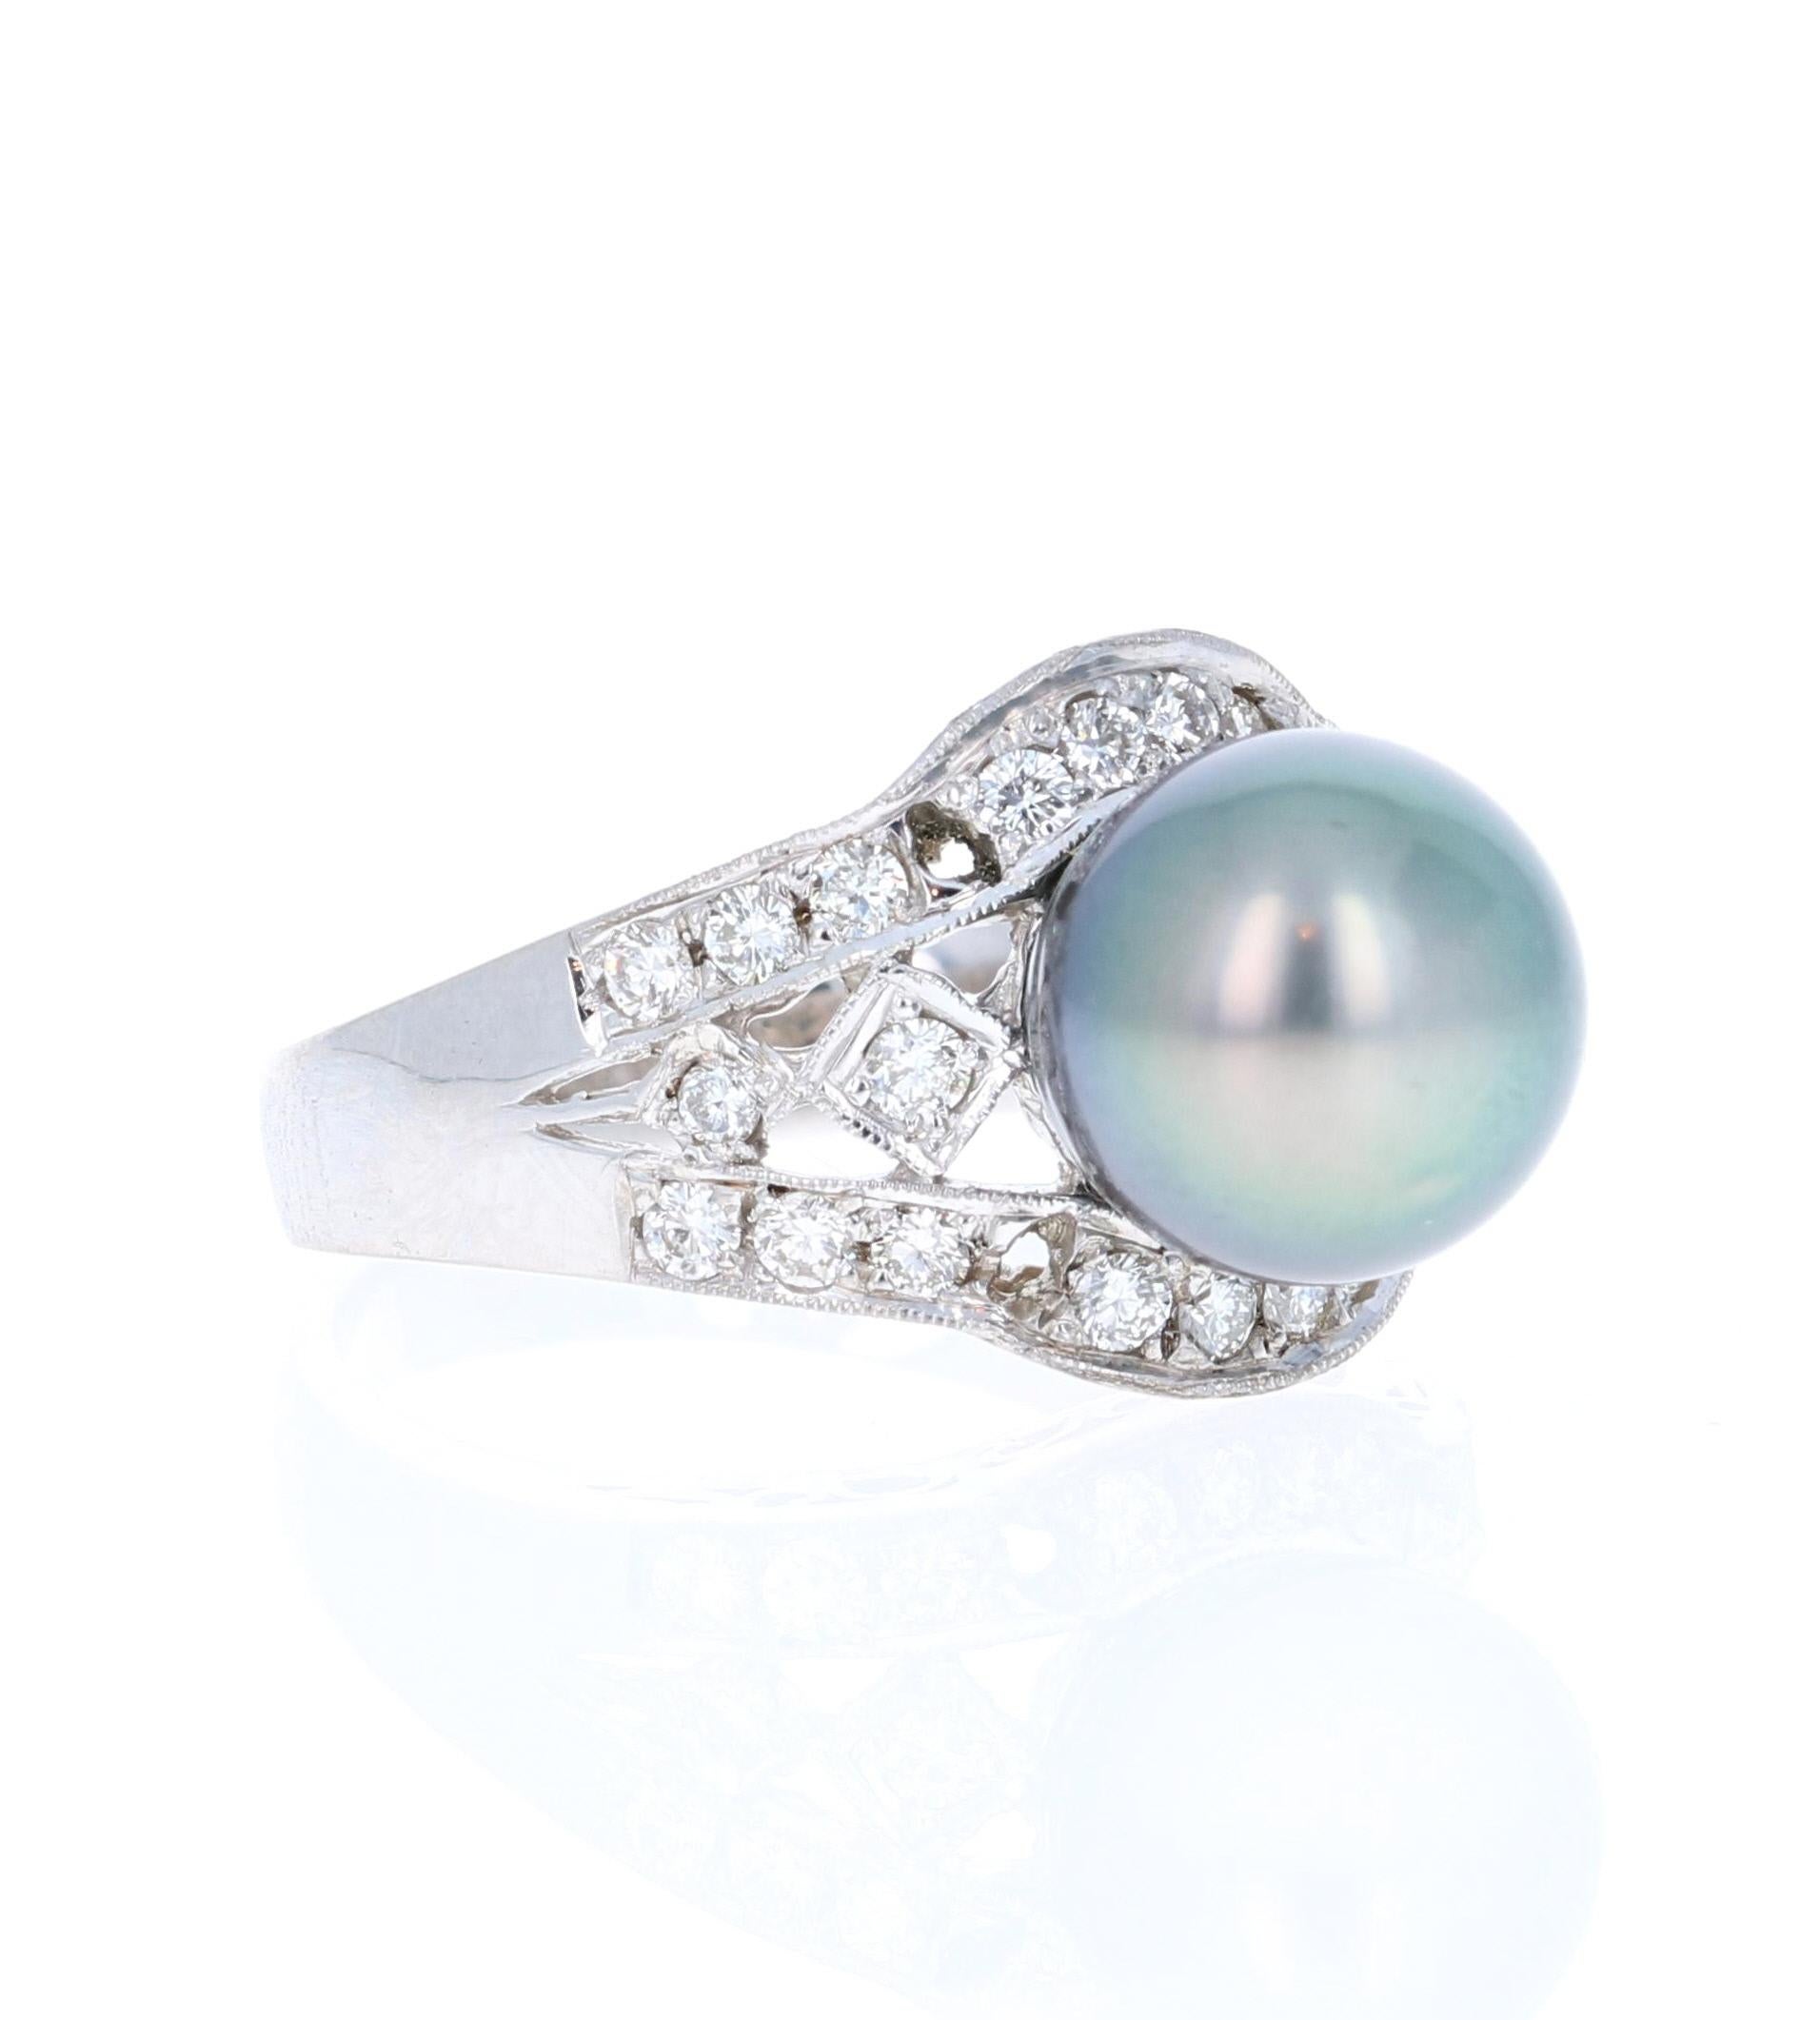 0.58 Carat Diamond and Tahitian Pearl 14K White Gold Ring
This cute and dainty ring has 26 Round Cut Diamonds that weigh 0.58 Carats. (Clarity: VS, Color: H).  The ring is crafted in 14K White Gold and weighs approximately 5.0grams
The ring size is